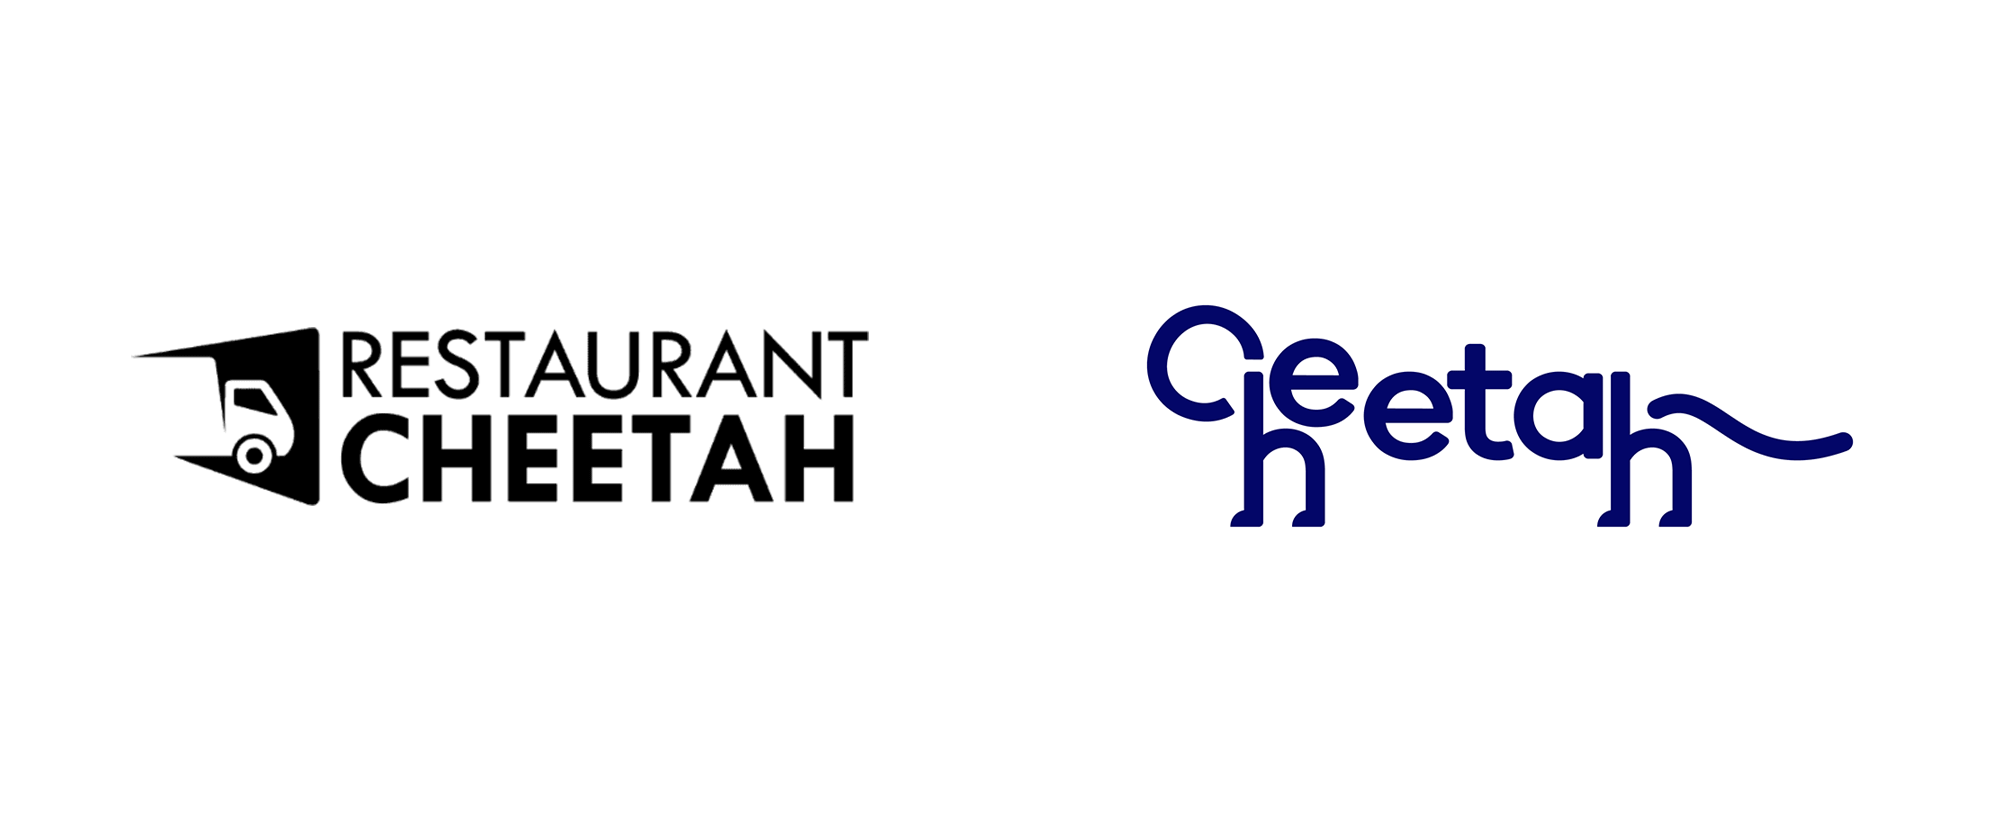 At Logo - Brand New: New Logo and Identity for Cheetah by Moving Brands